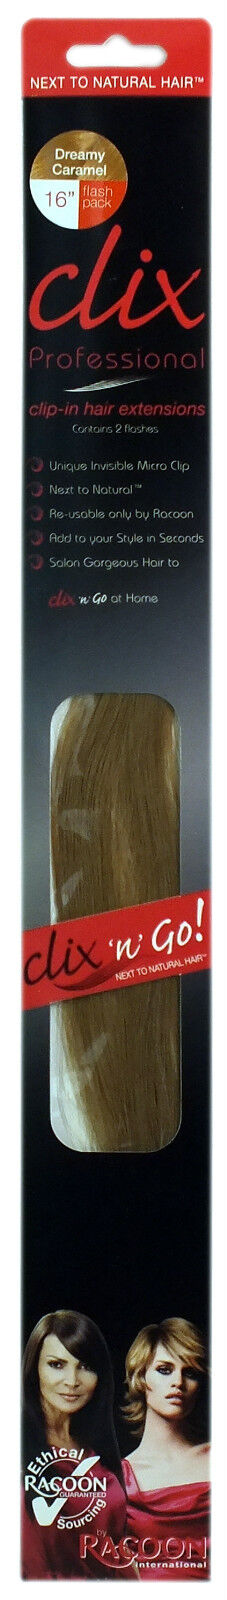 Racoon International Professional Clix N Go Clip in Hair Extensions 16” Length